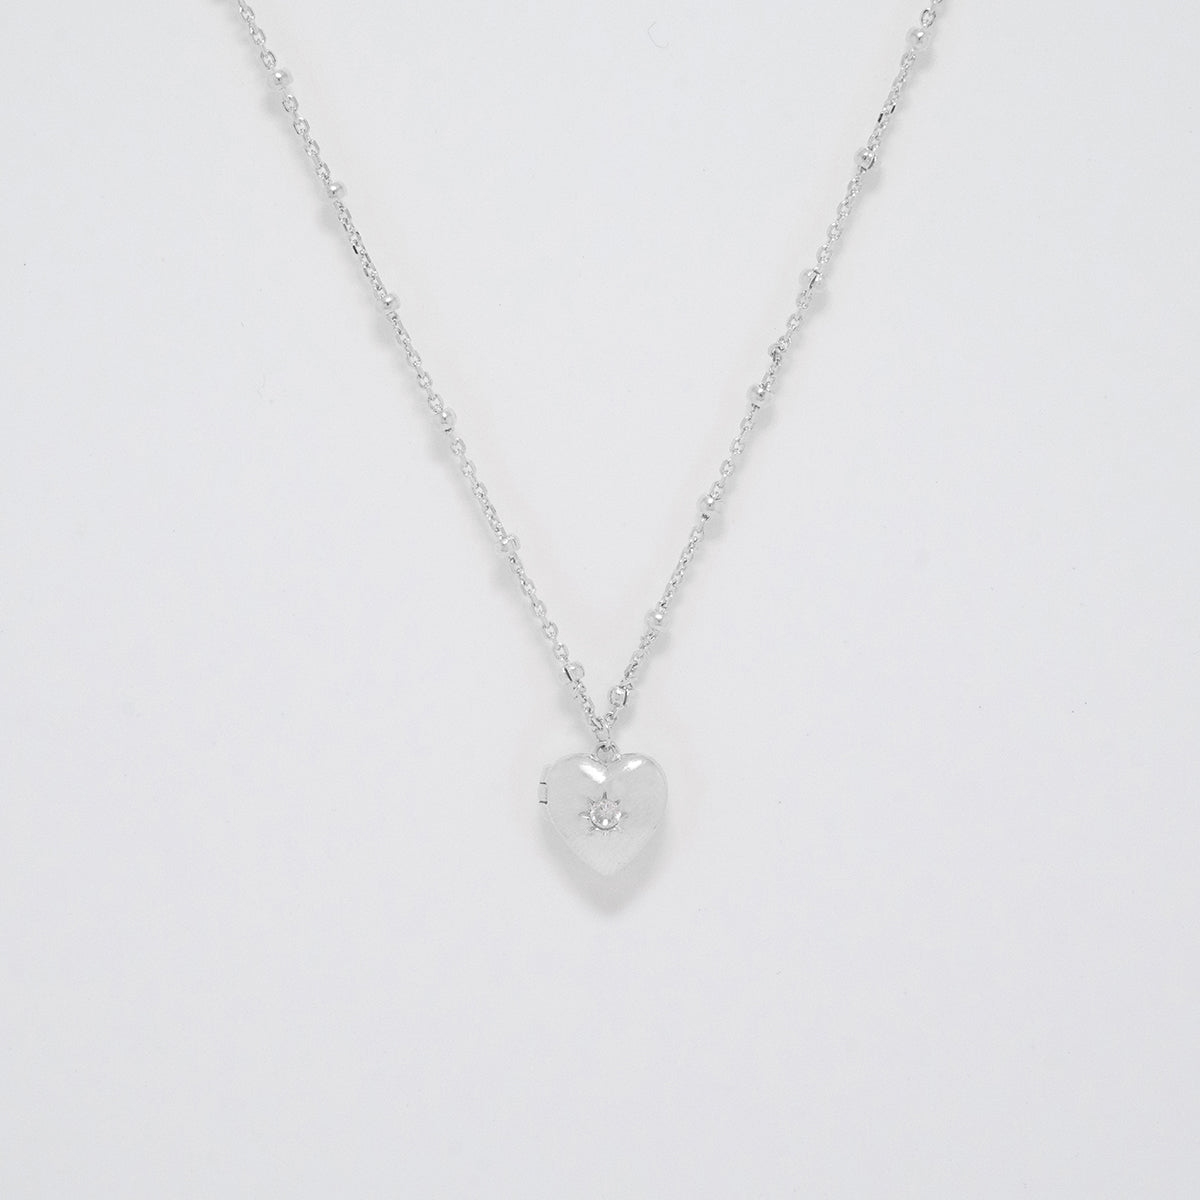 Open Your Heart Silver Pendant Necklace